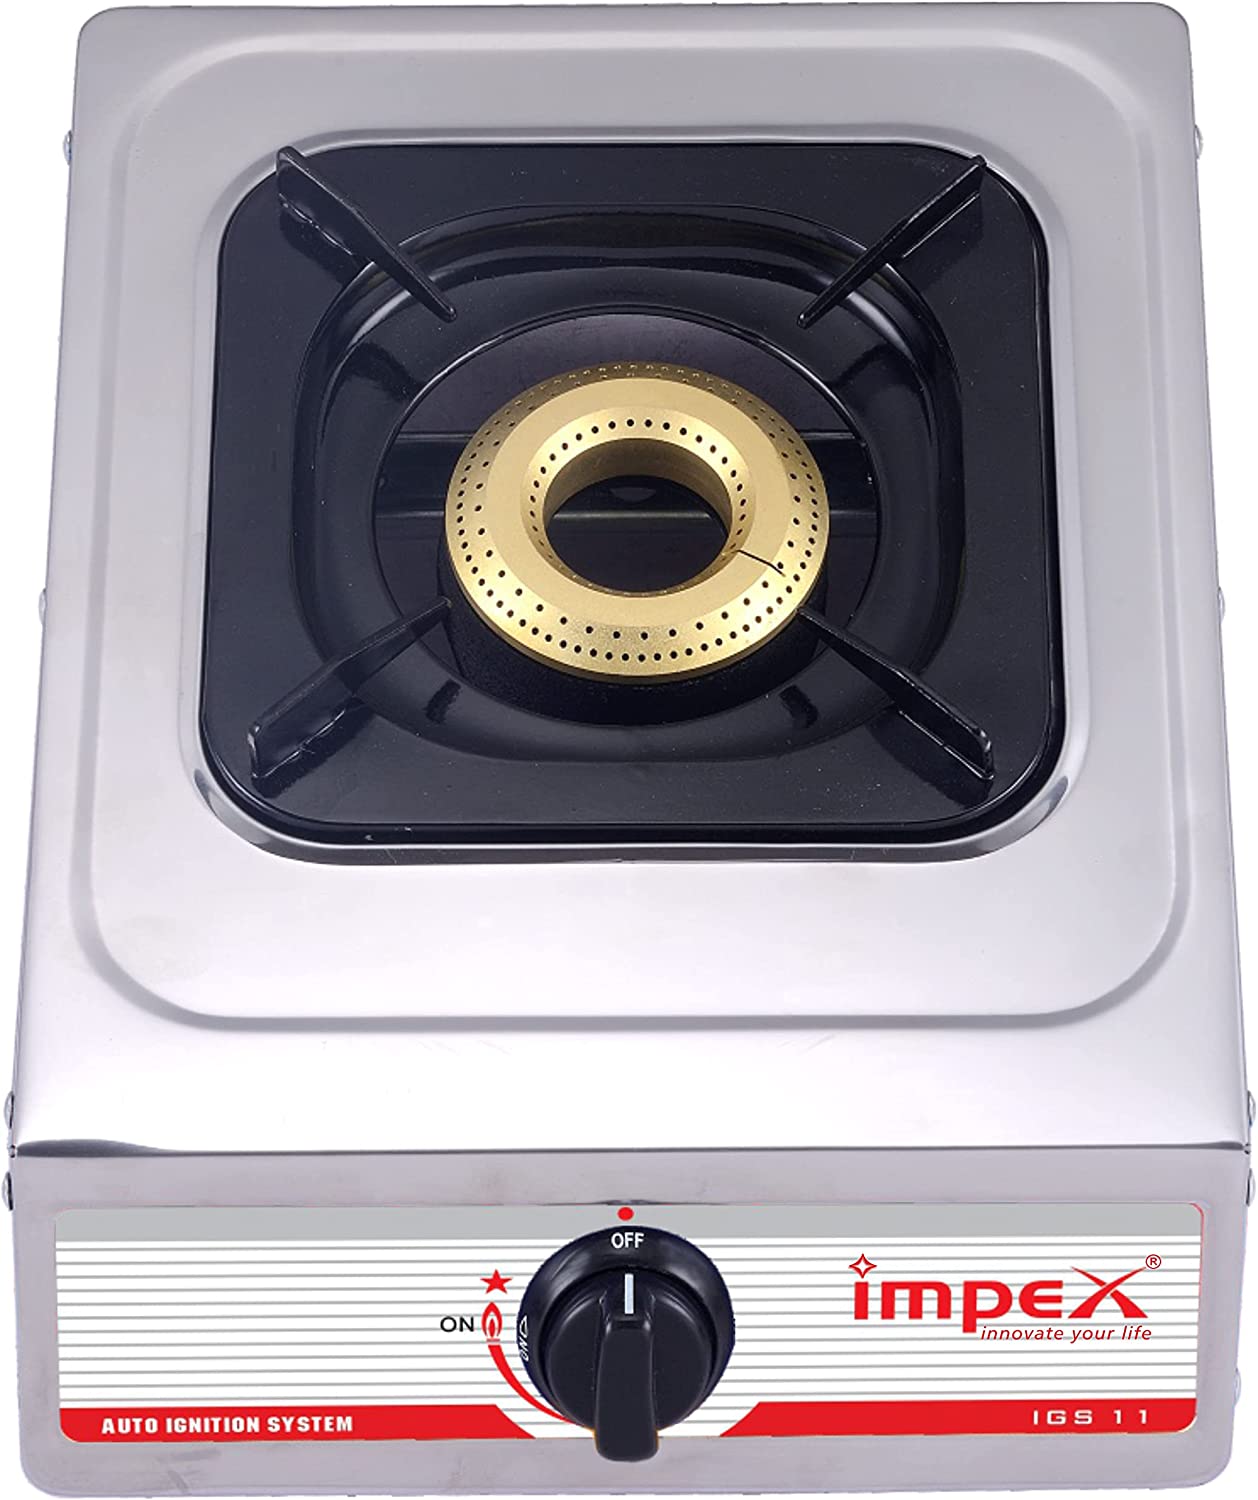 Impex IGS 111 Single Burner LP Gas Stove with Auto Ignition Switch, 2 Years Warranty